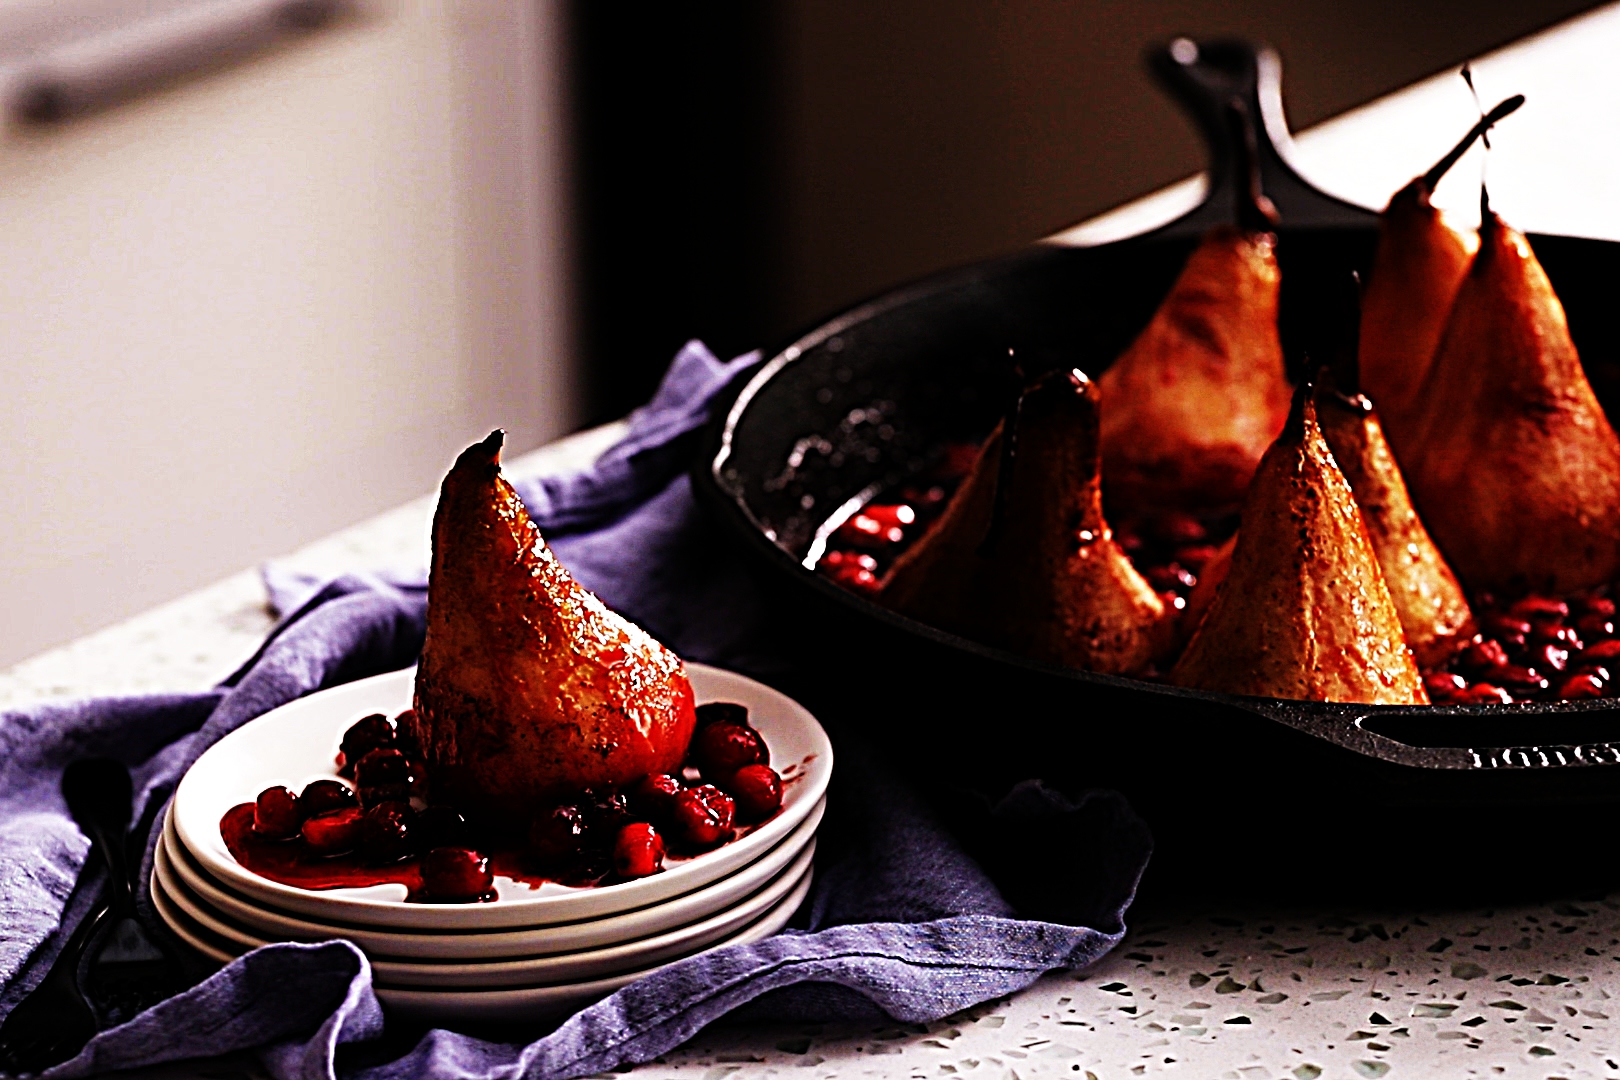 Stupid-Easy Recipe for Vanilla Roasted Pears with Cranberries (#1 Top-Rated)